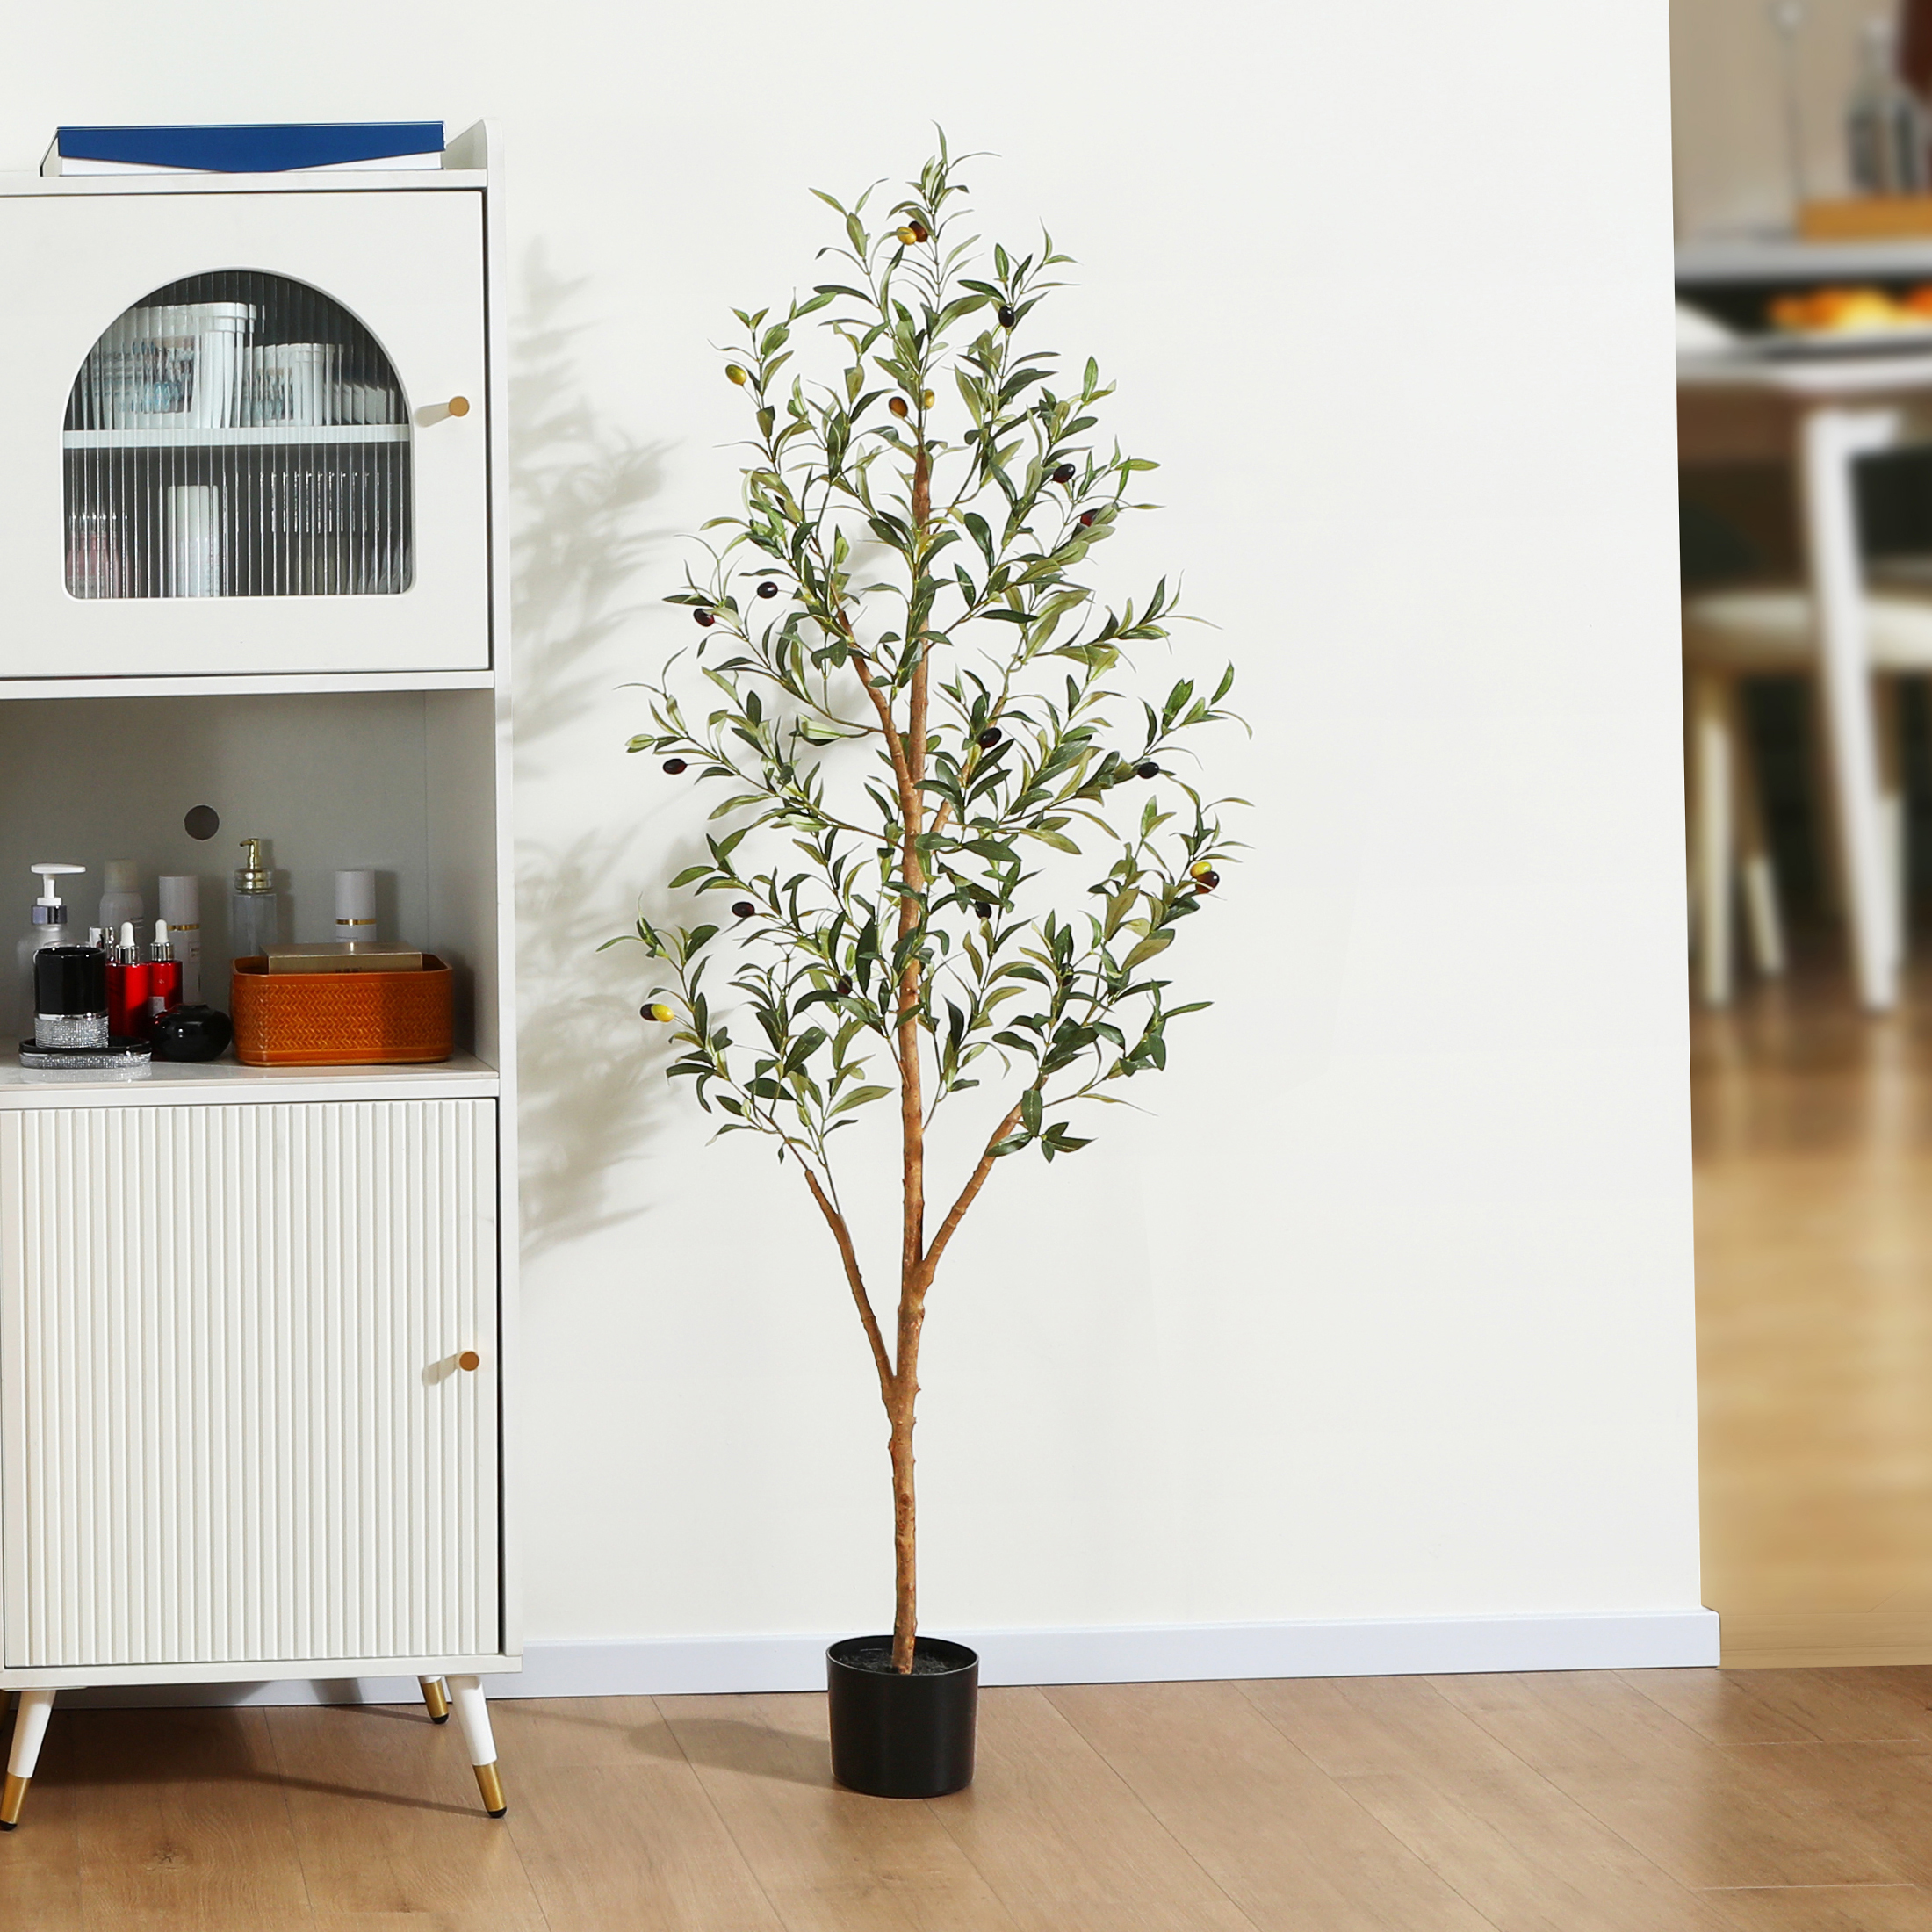 5 ft Artificial Olive Plants with Realistic Leaves and Natural Trunk, Silk Fake Potted Tree with Wood Branches and Fruits, Faux Olive Tree for Office